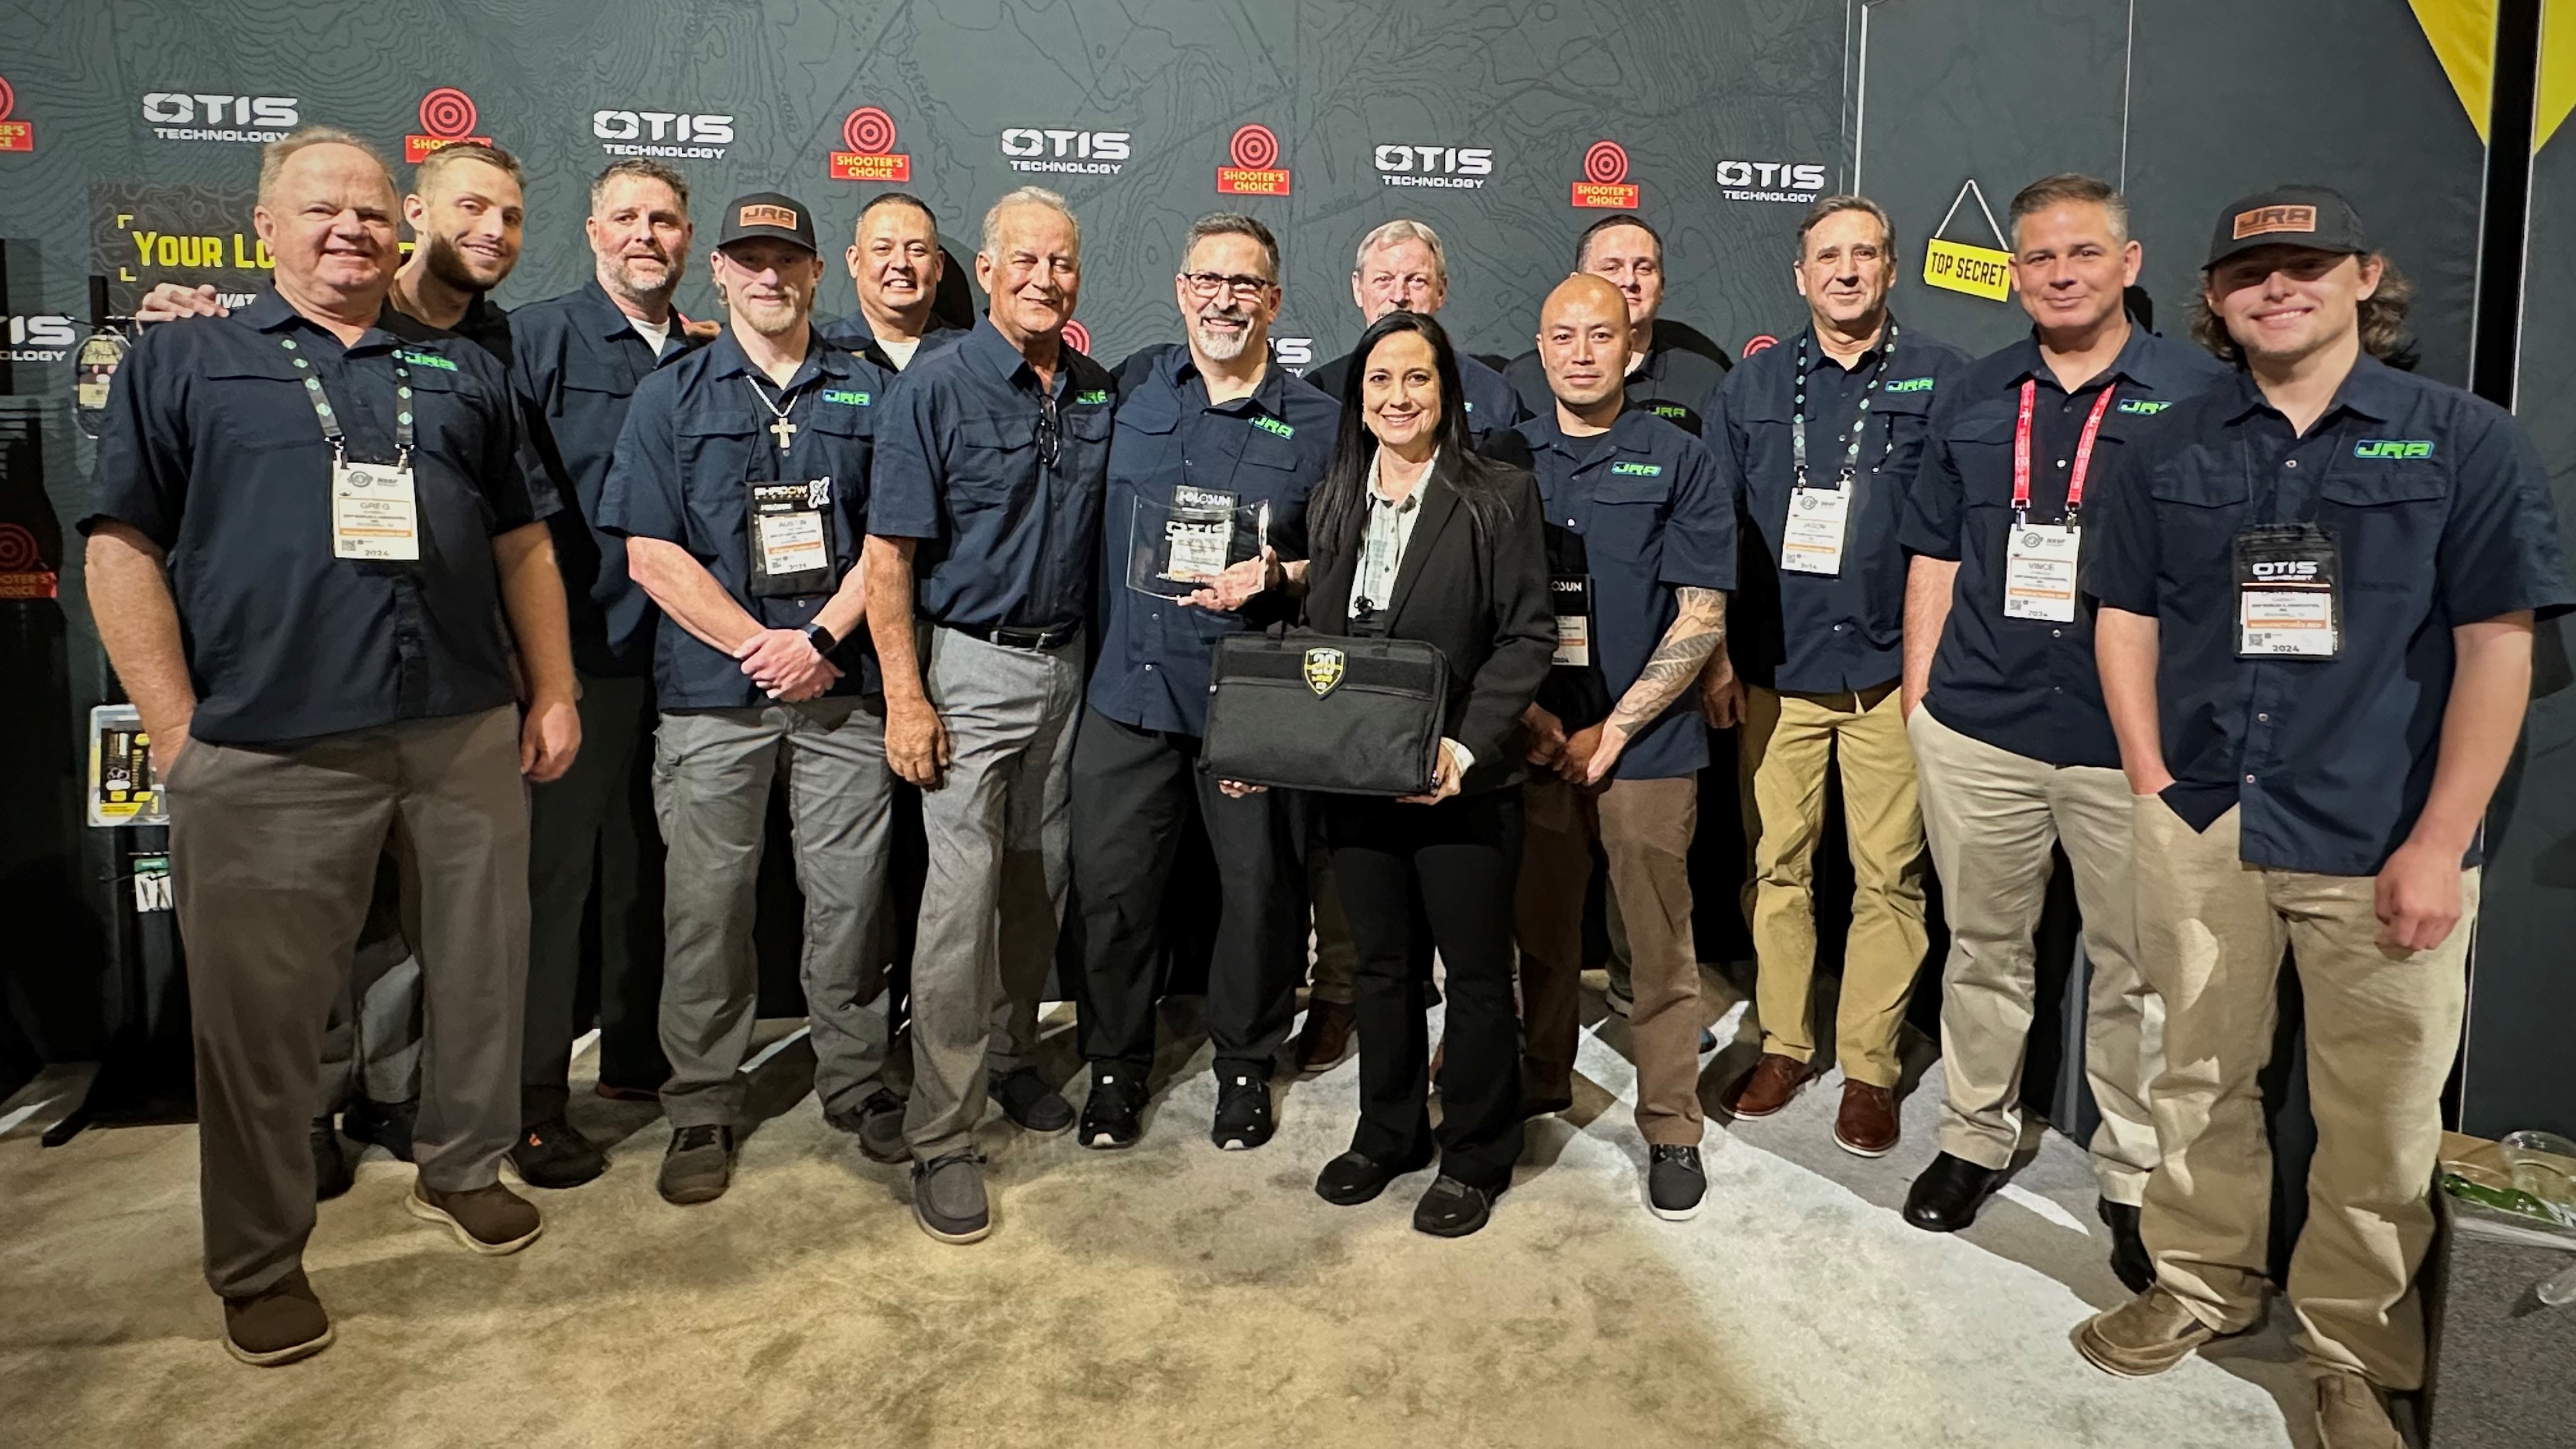 Jeff Robles & Associates was honored for its 20-year anniversary representing Otis Technology and its portfolio of products